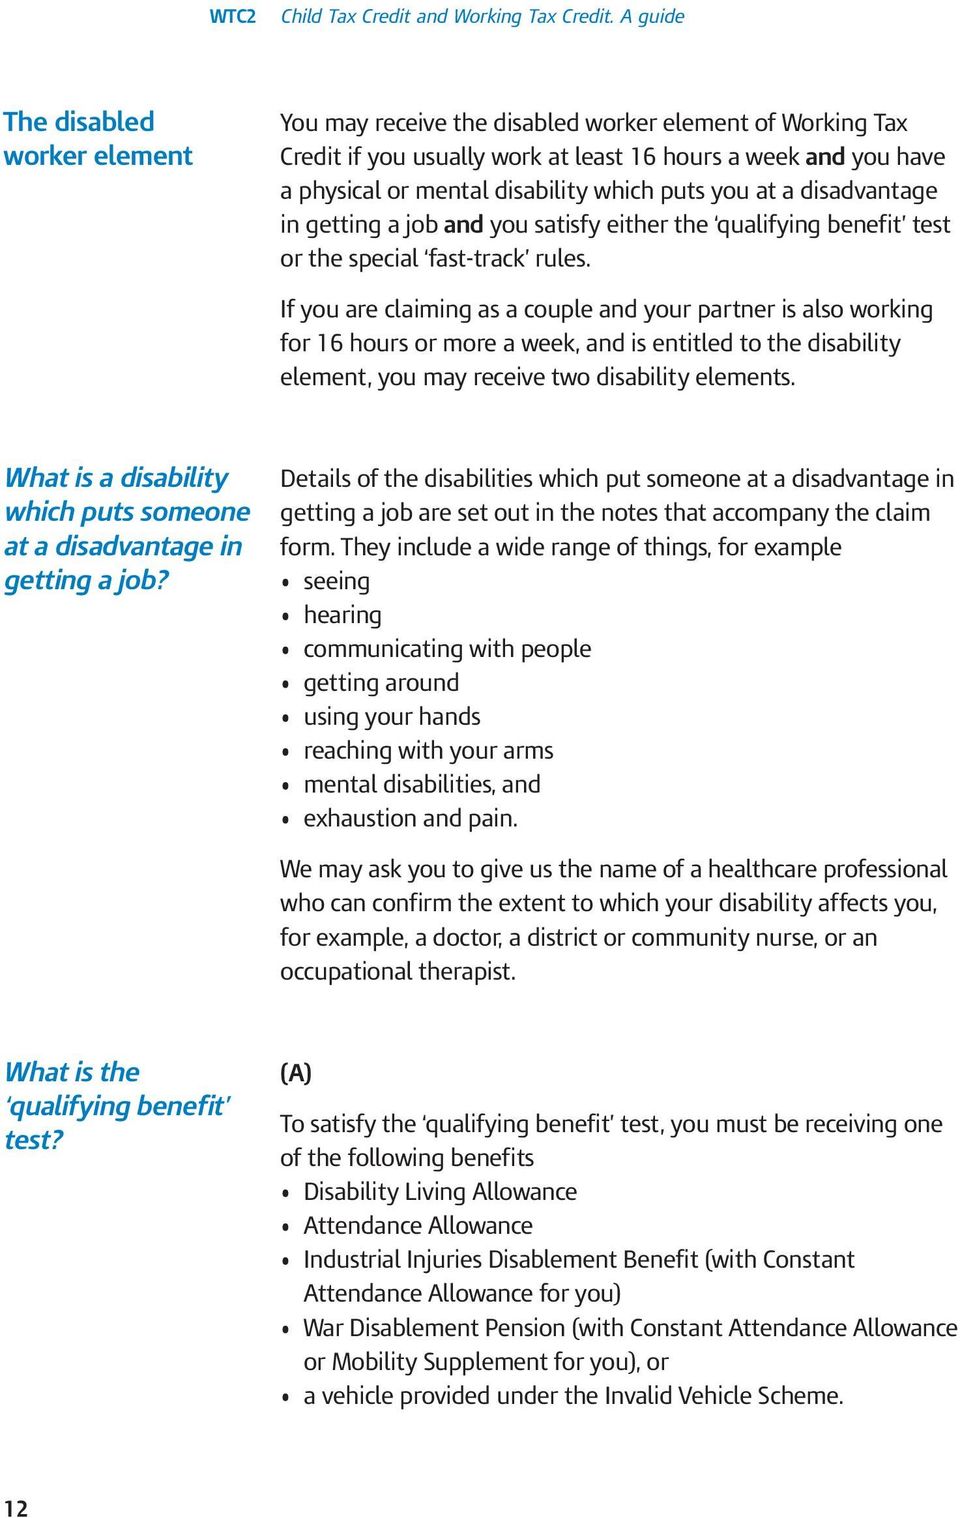 If you are claiming as a couple and your partner is also working for 16 hours or more a week, and is entitled to the disability element, you may receive two disability elements.